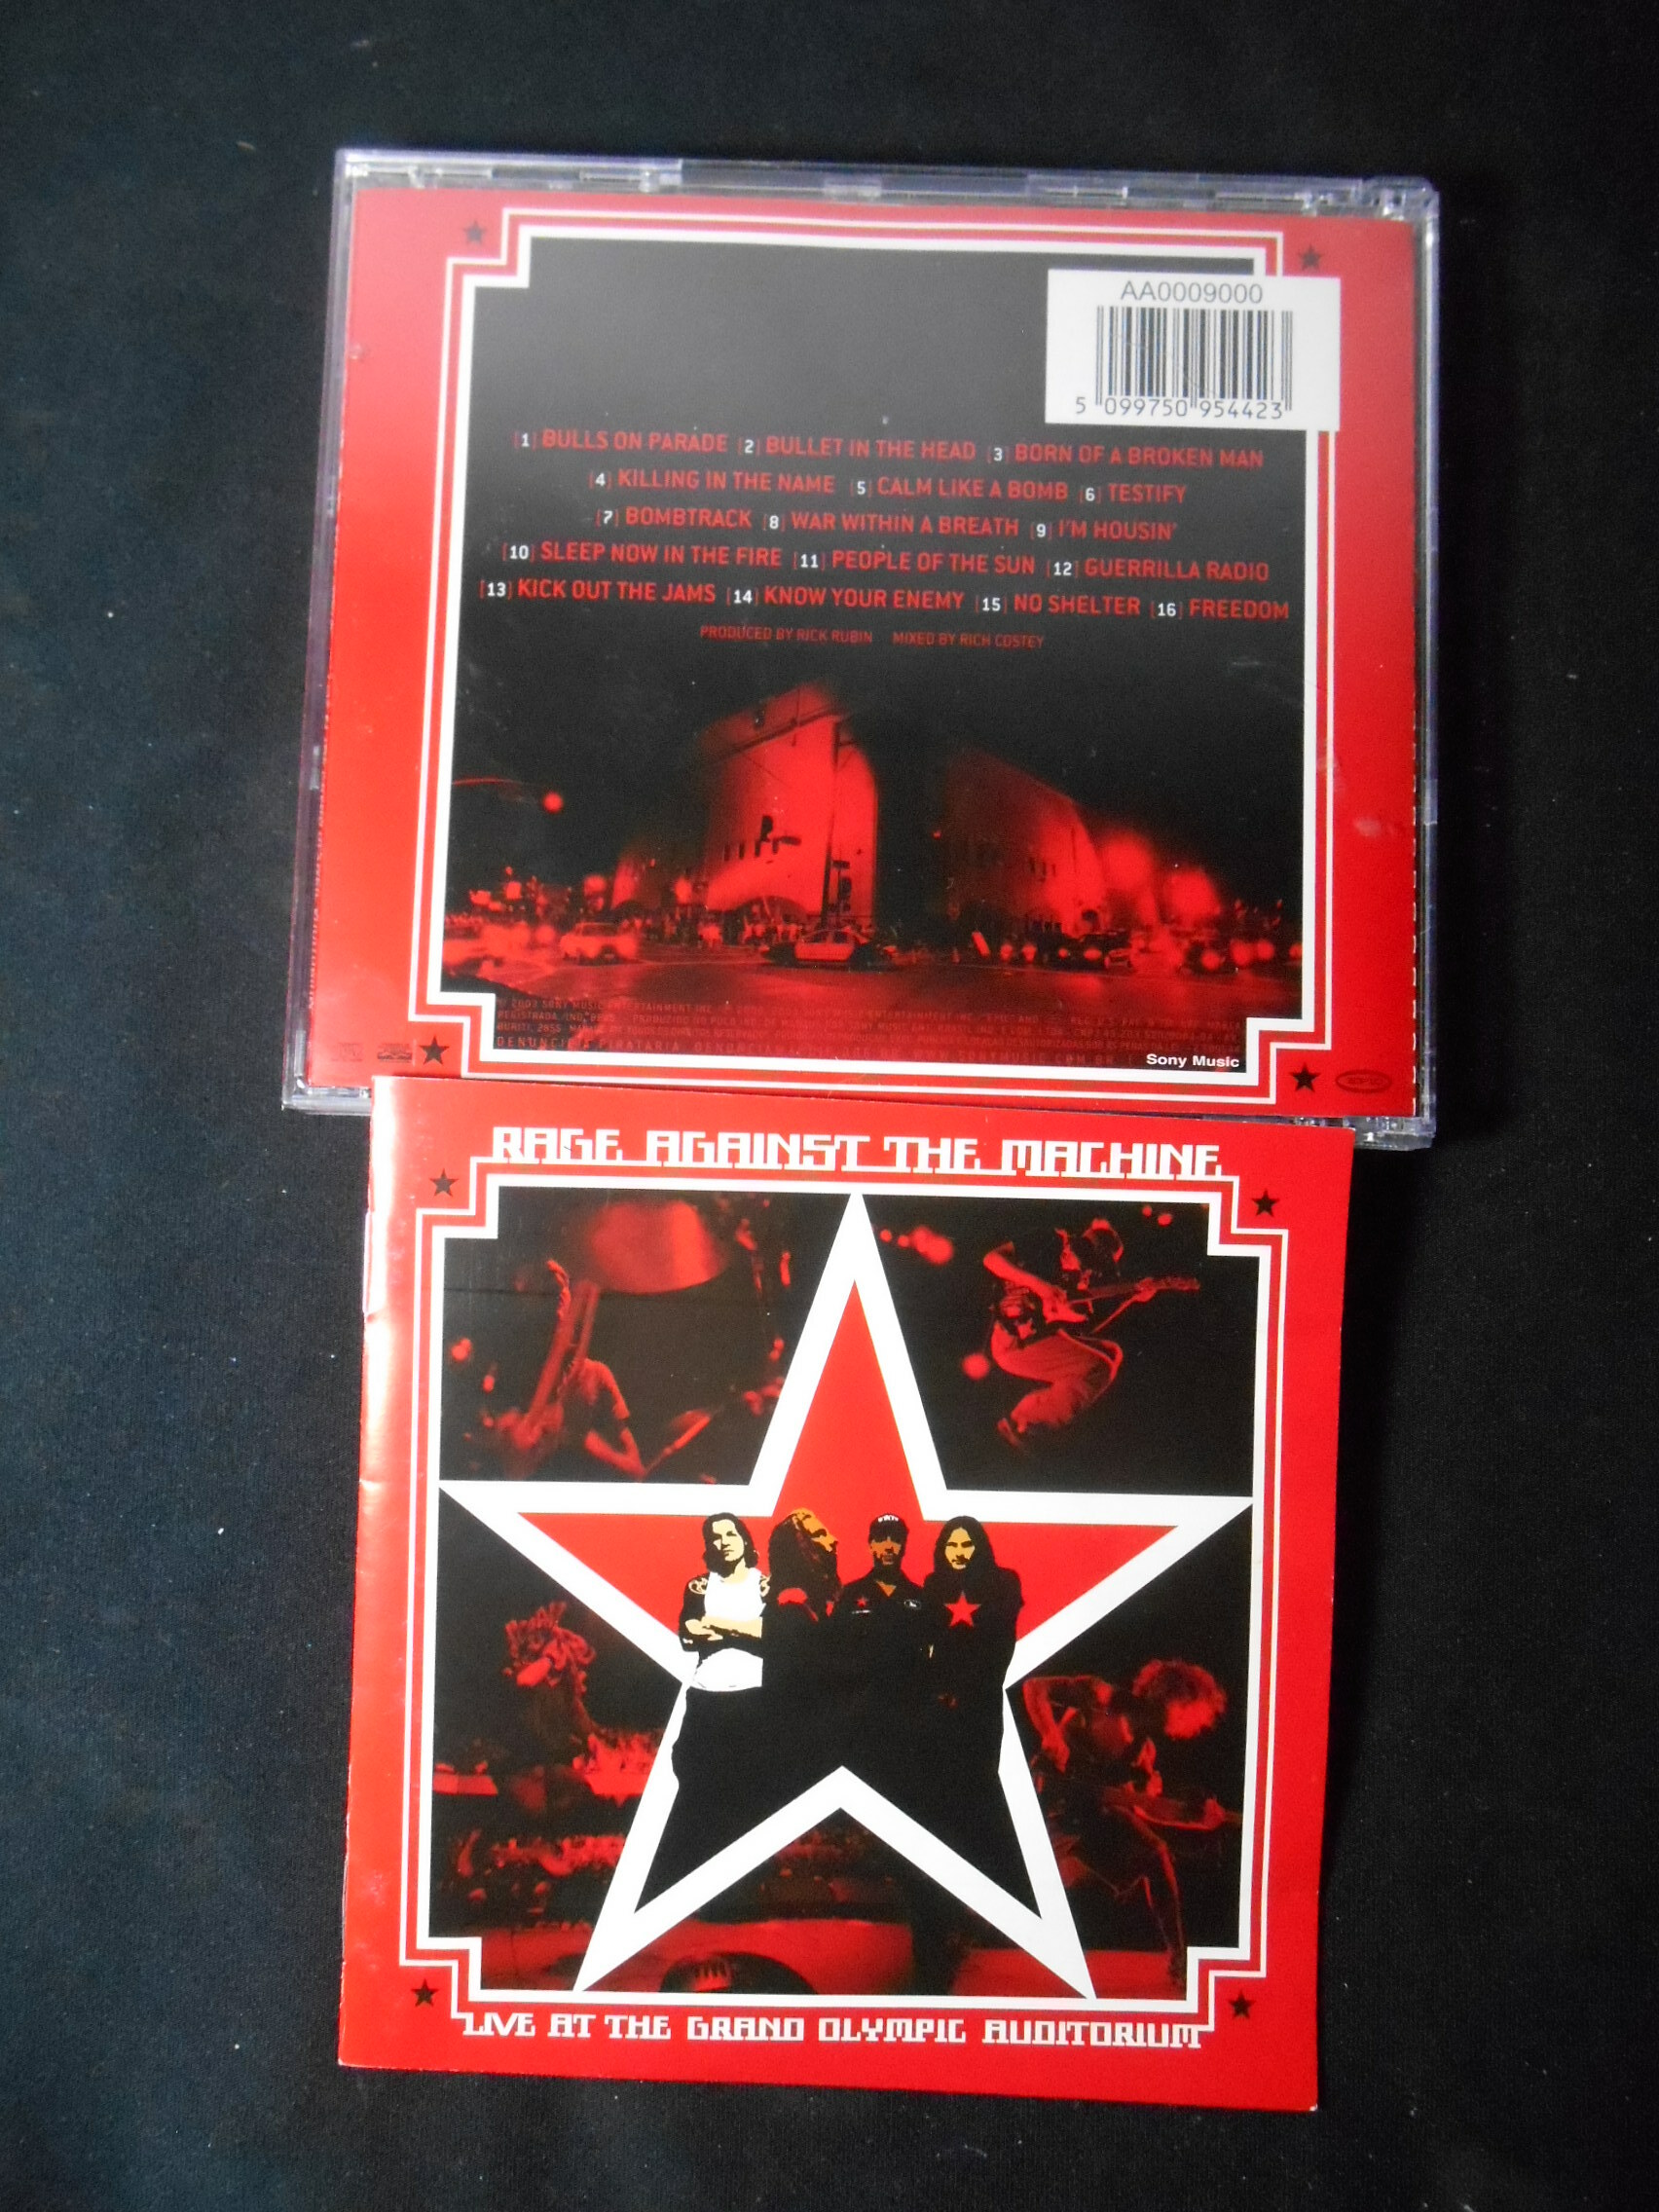 CD - Rage Against the Machine - Live At The Grand Olympic Auditorium